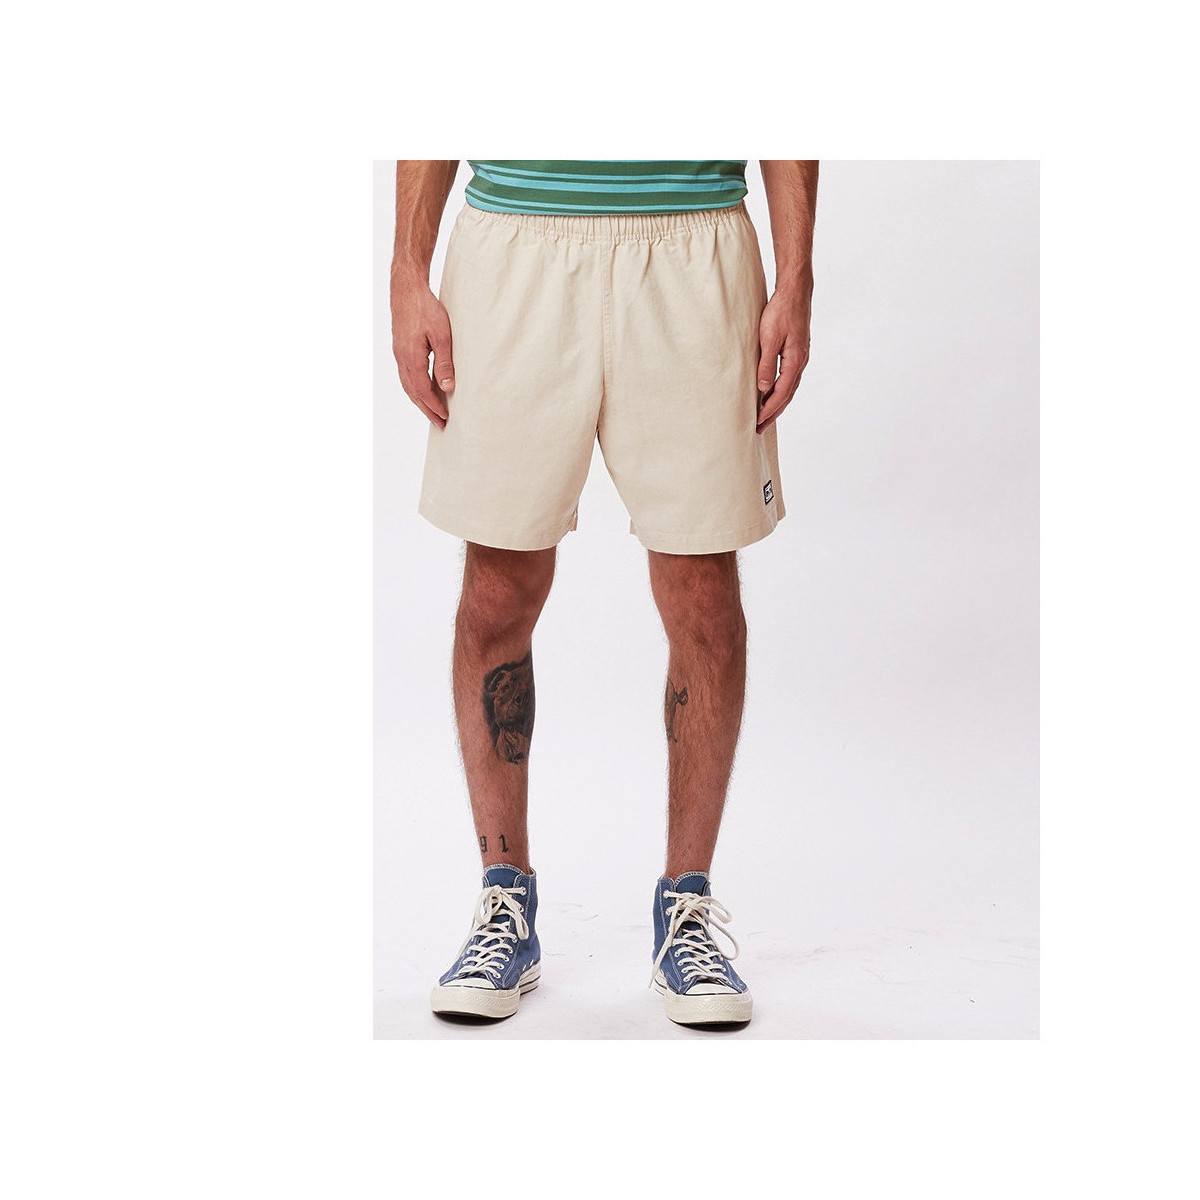 textil Herre Shorts Obey Easy relaxed twill short Beige